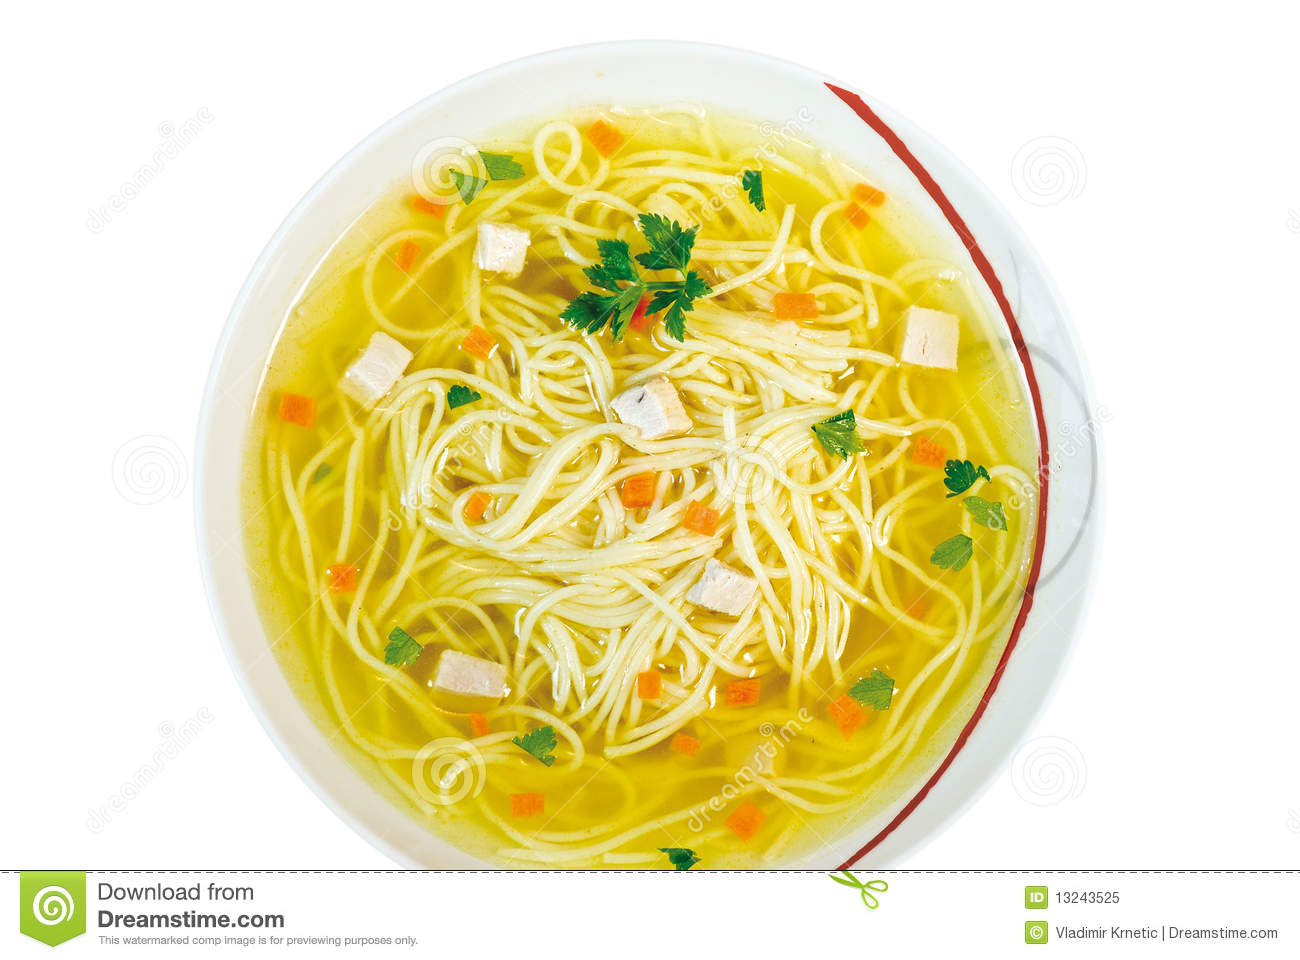 Chicken Noodle Soup Royalty Free Stock Photo   Image  13243525